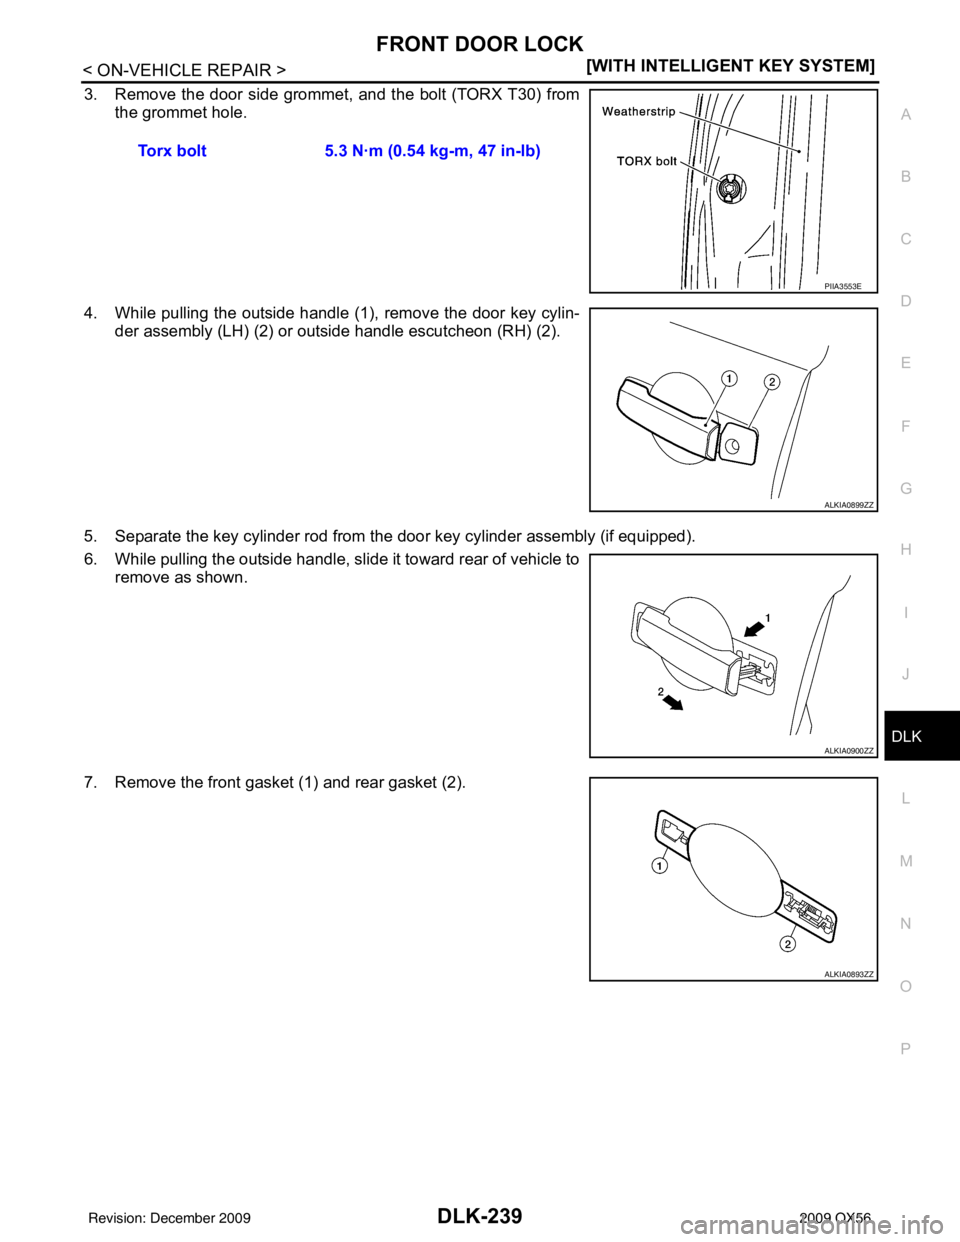 INFINITI QX56 2009  Factory Service Manual FRONT DOOR LOCKDLK-239
< ON-VEHICLE REPAIR > [WITH INTELLIGENT KEY SYSTEM]
C
D
E
F
G H
I
J
L
M A
B
DLK
N
O P
3. Remove the door side grommet, and the bolt (TORX T30) from the grommet hole.
4. While pu